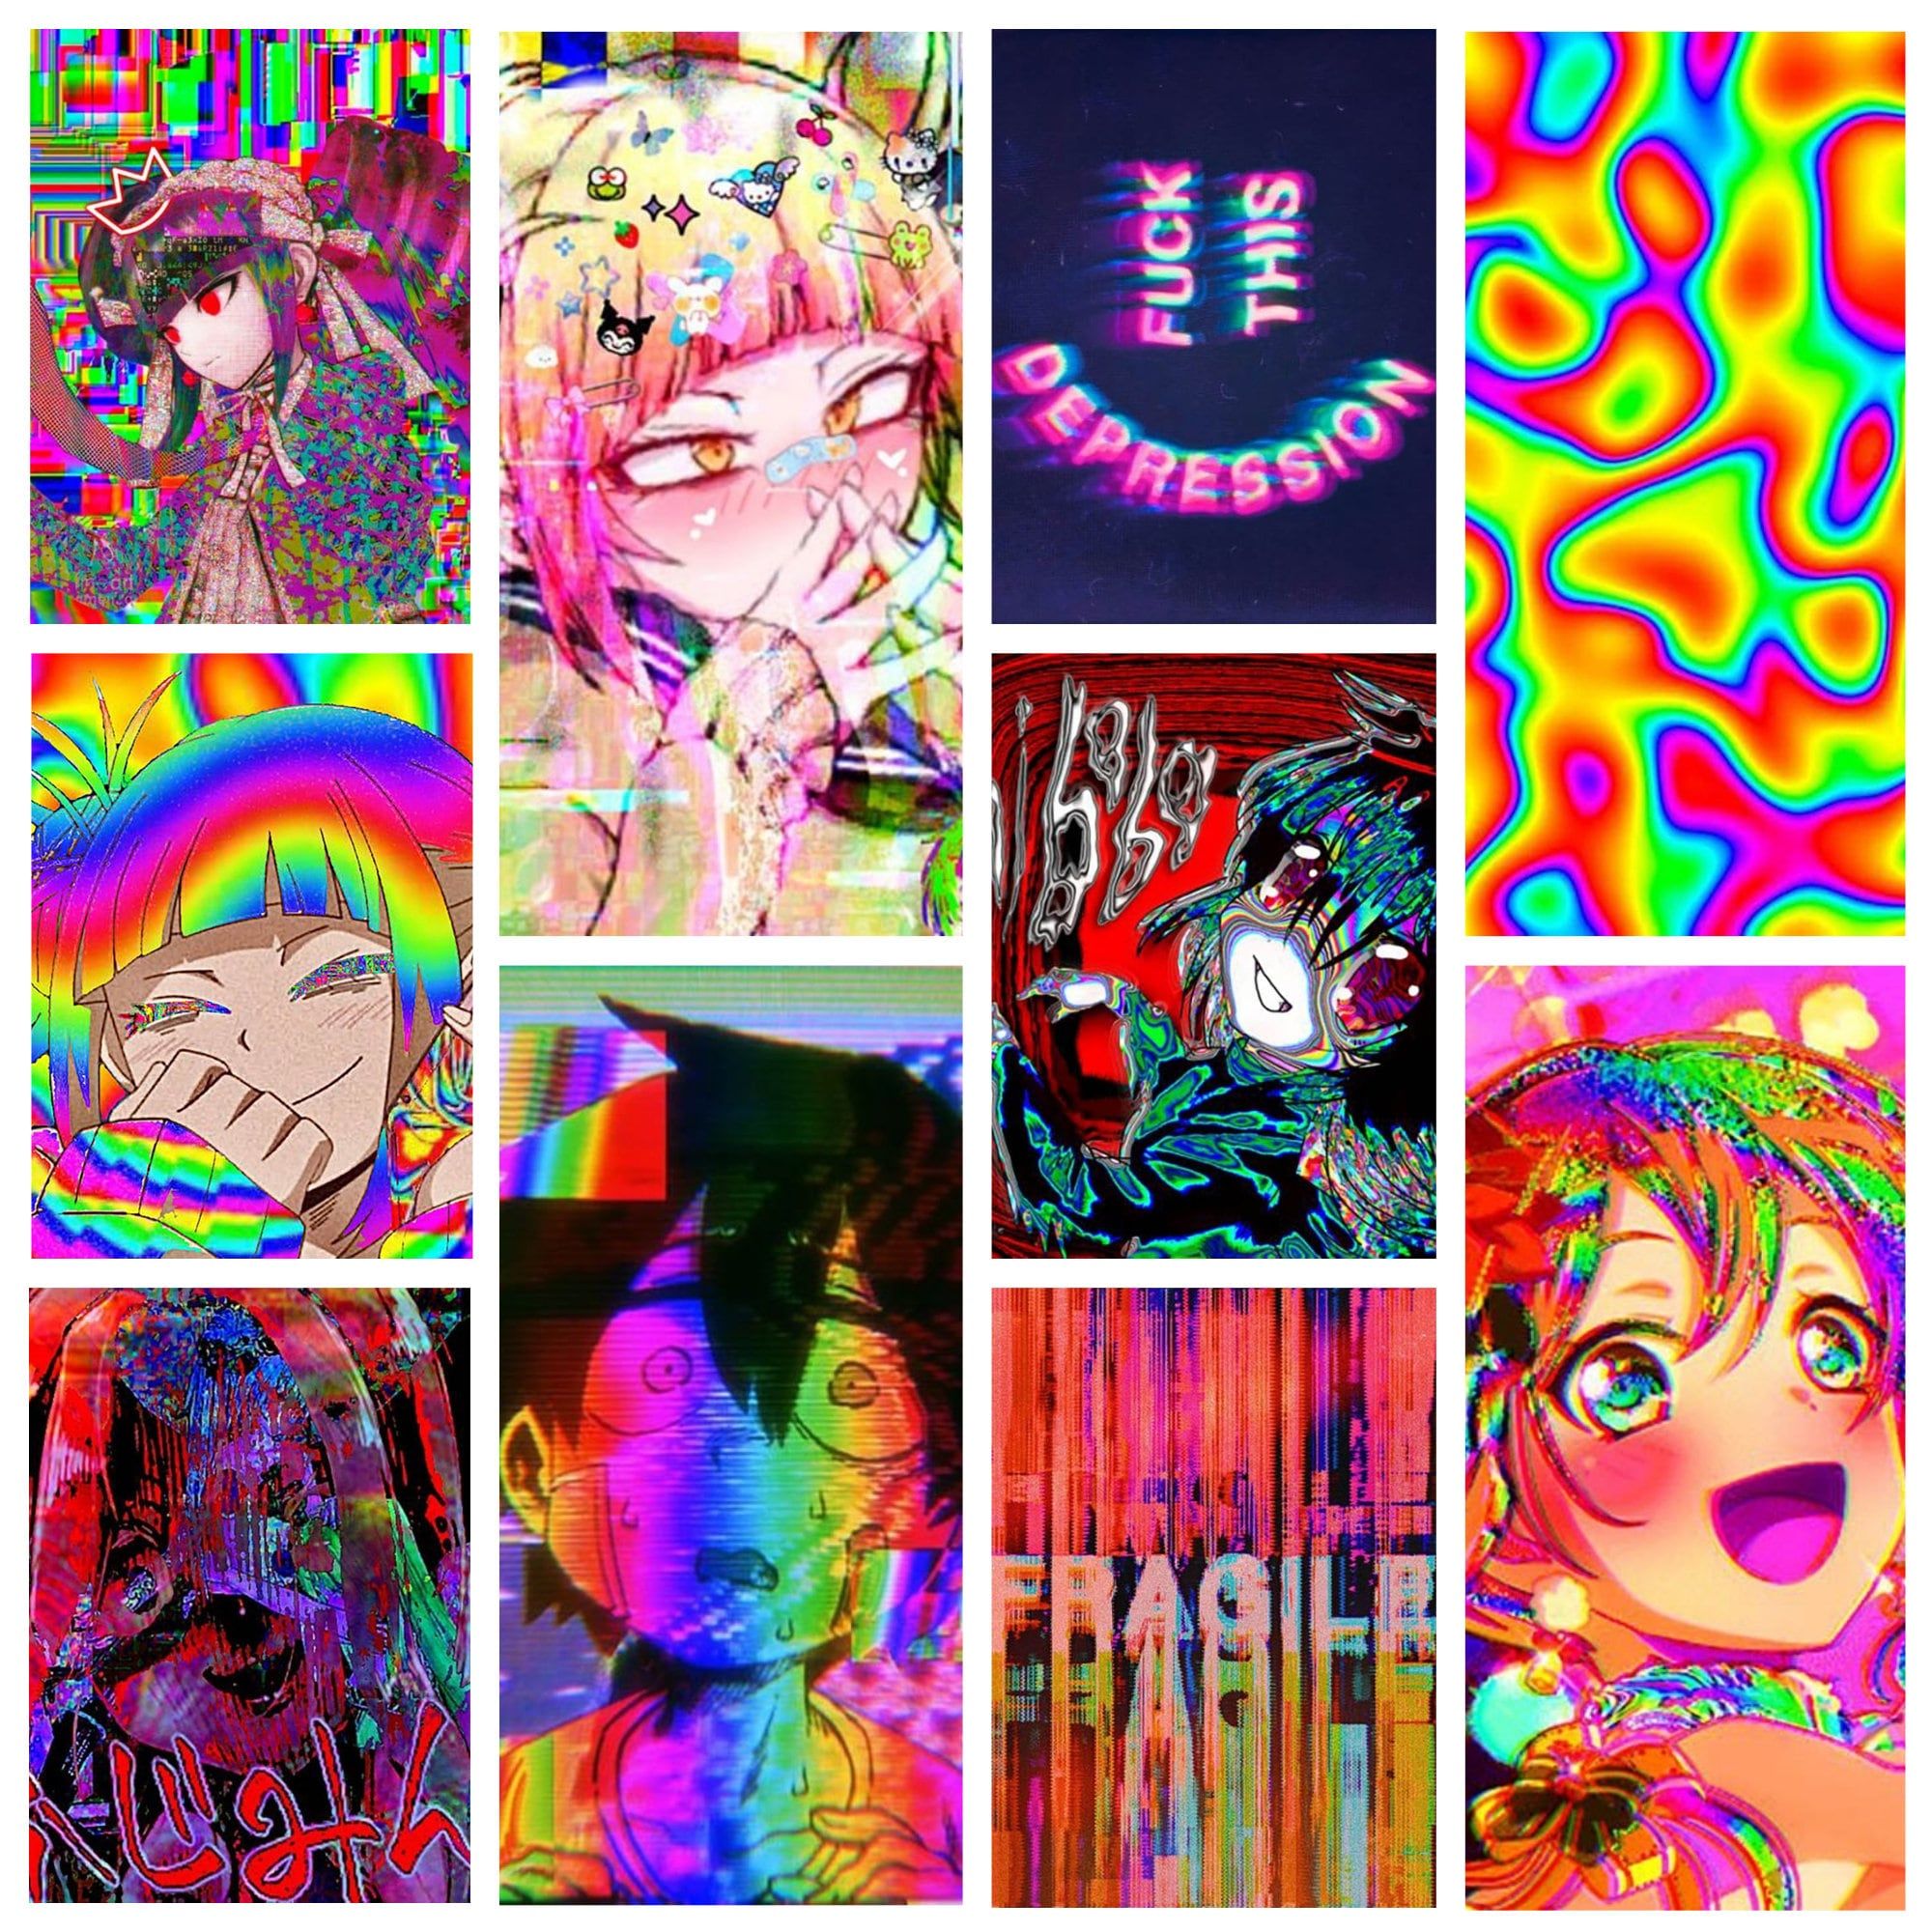 Aesthetic anime backgrounds for phone. - Glitchcore